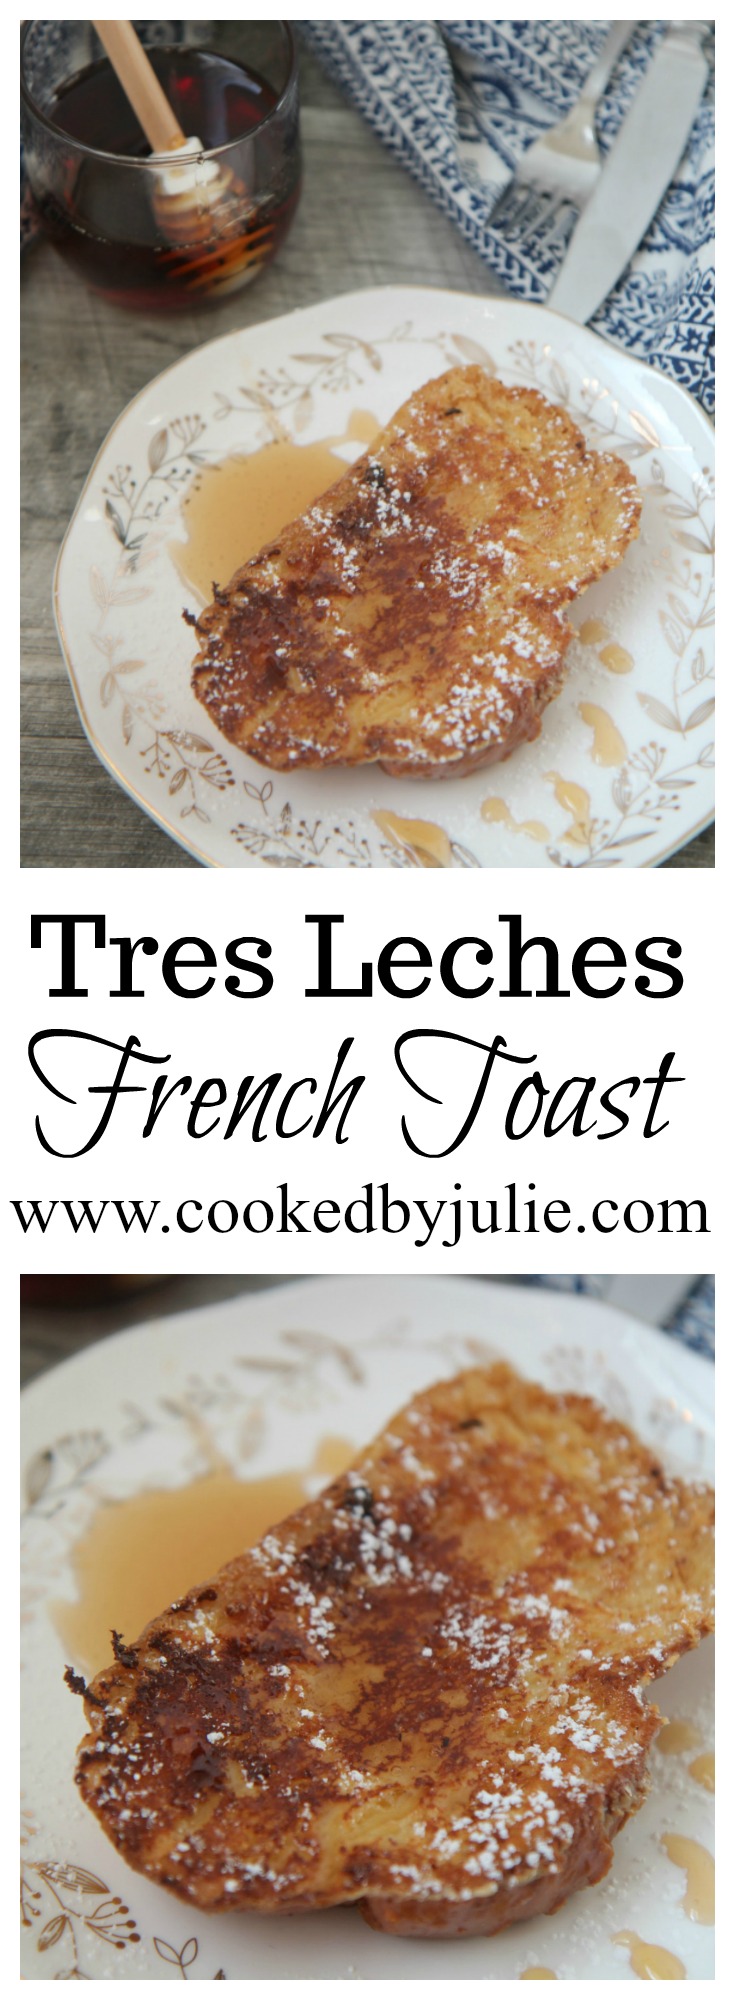 Lean how to make tres leches French Toast from Cookedbyjulie.com